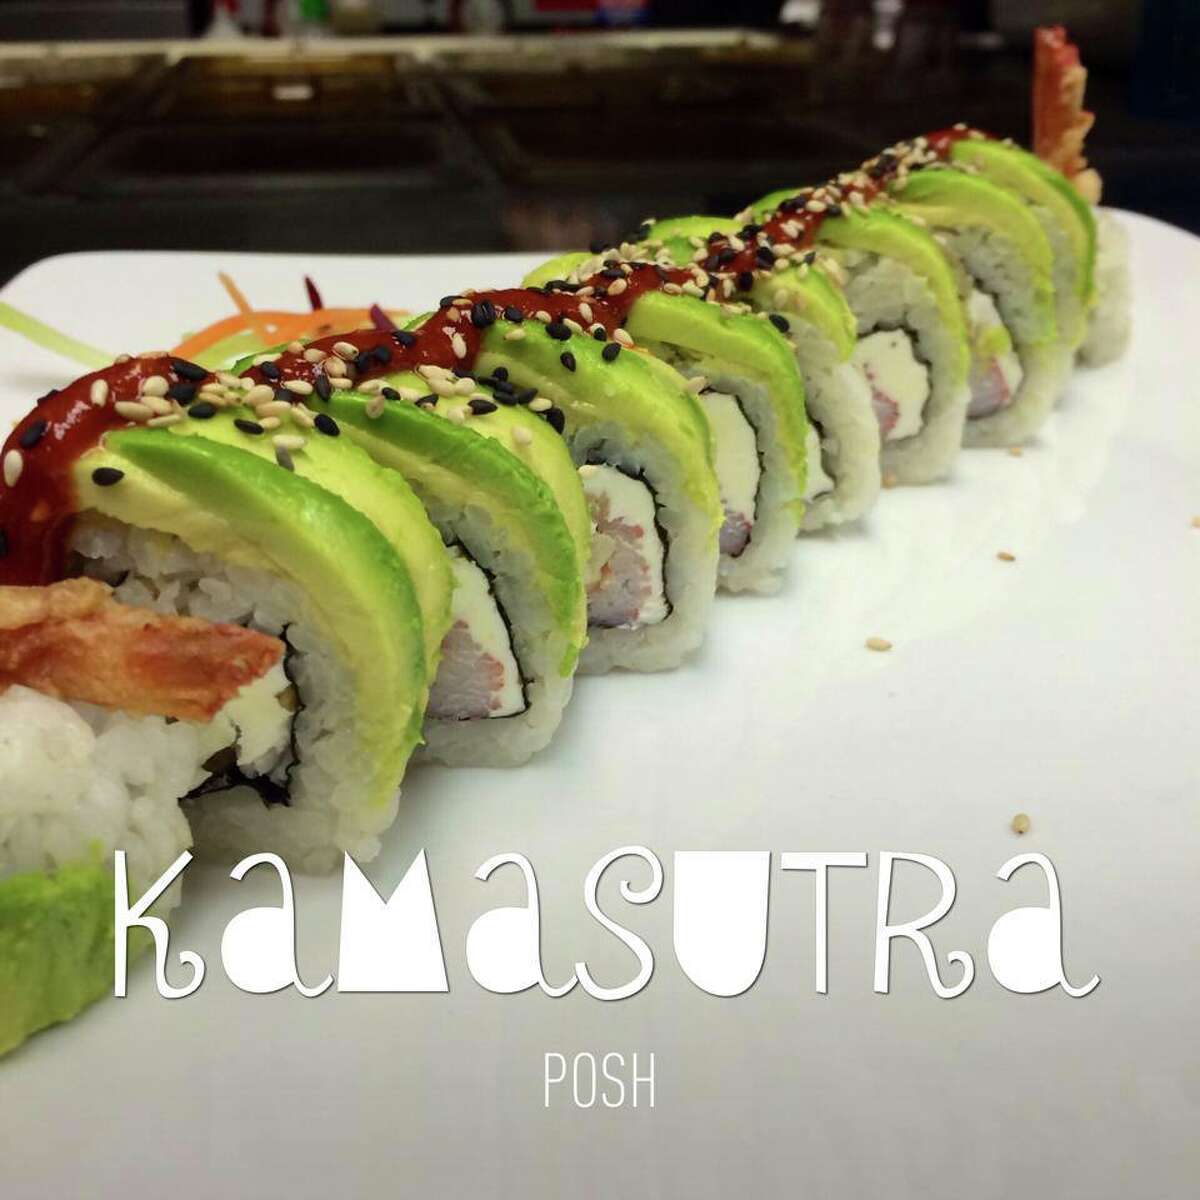 Posh Sushi, a Laredo-based sushi joint, is expected to open later this summer near the Dominion.